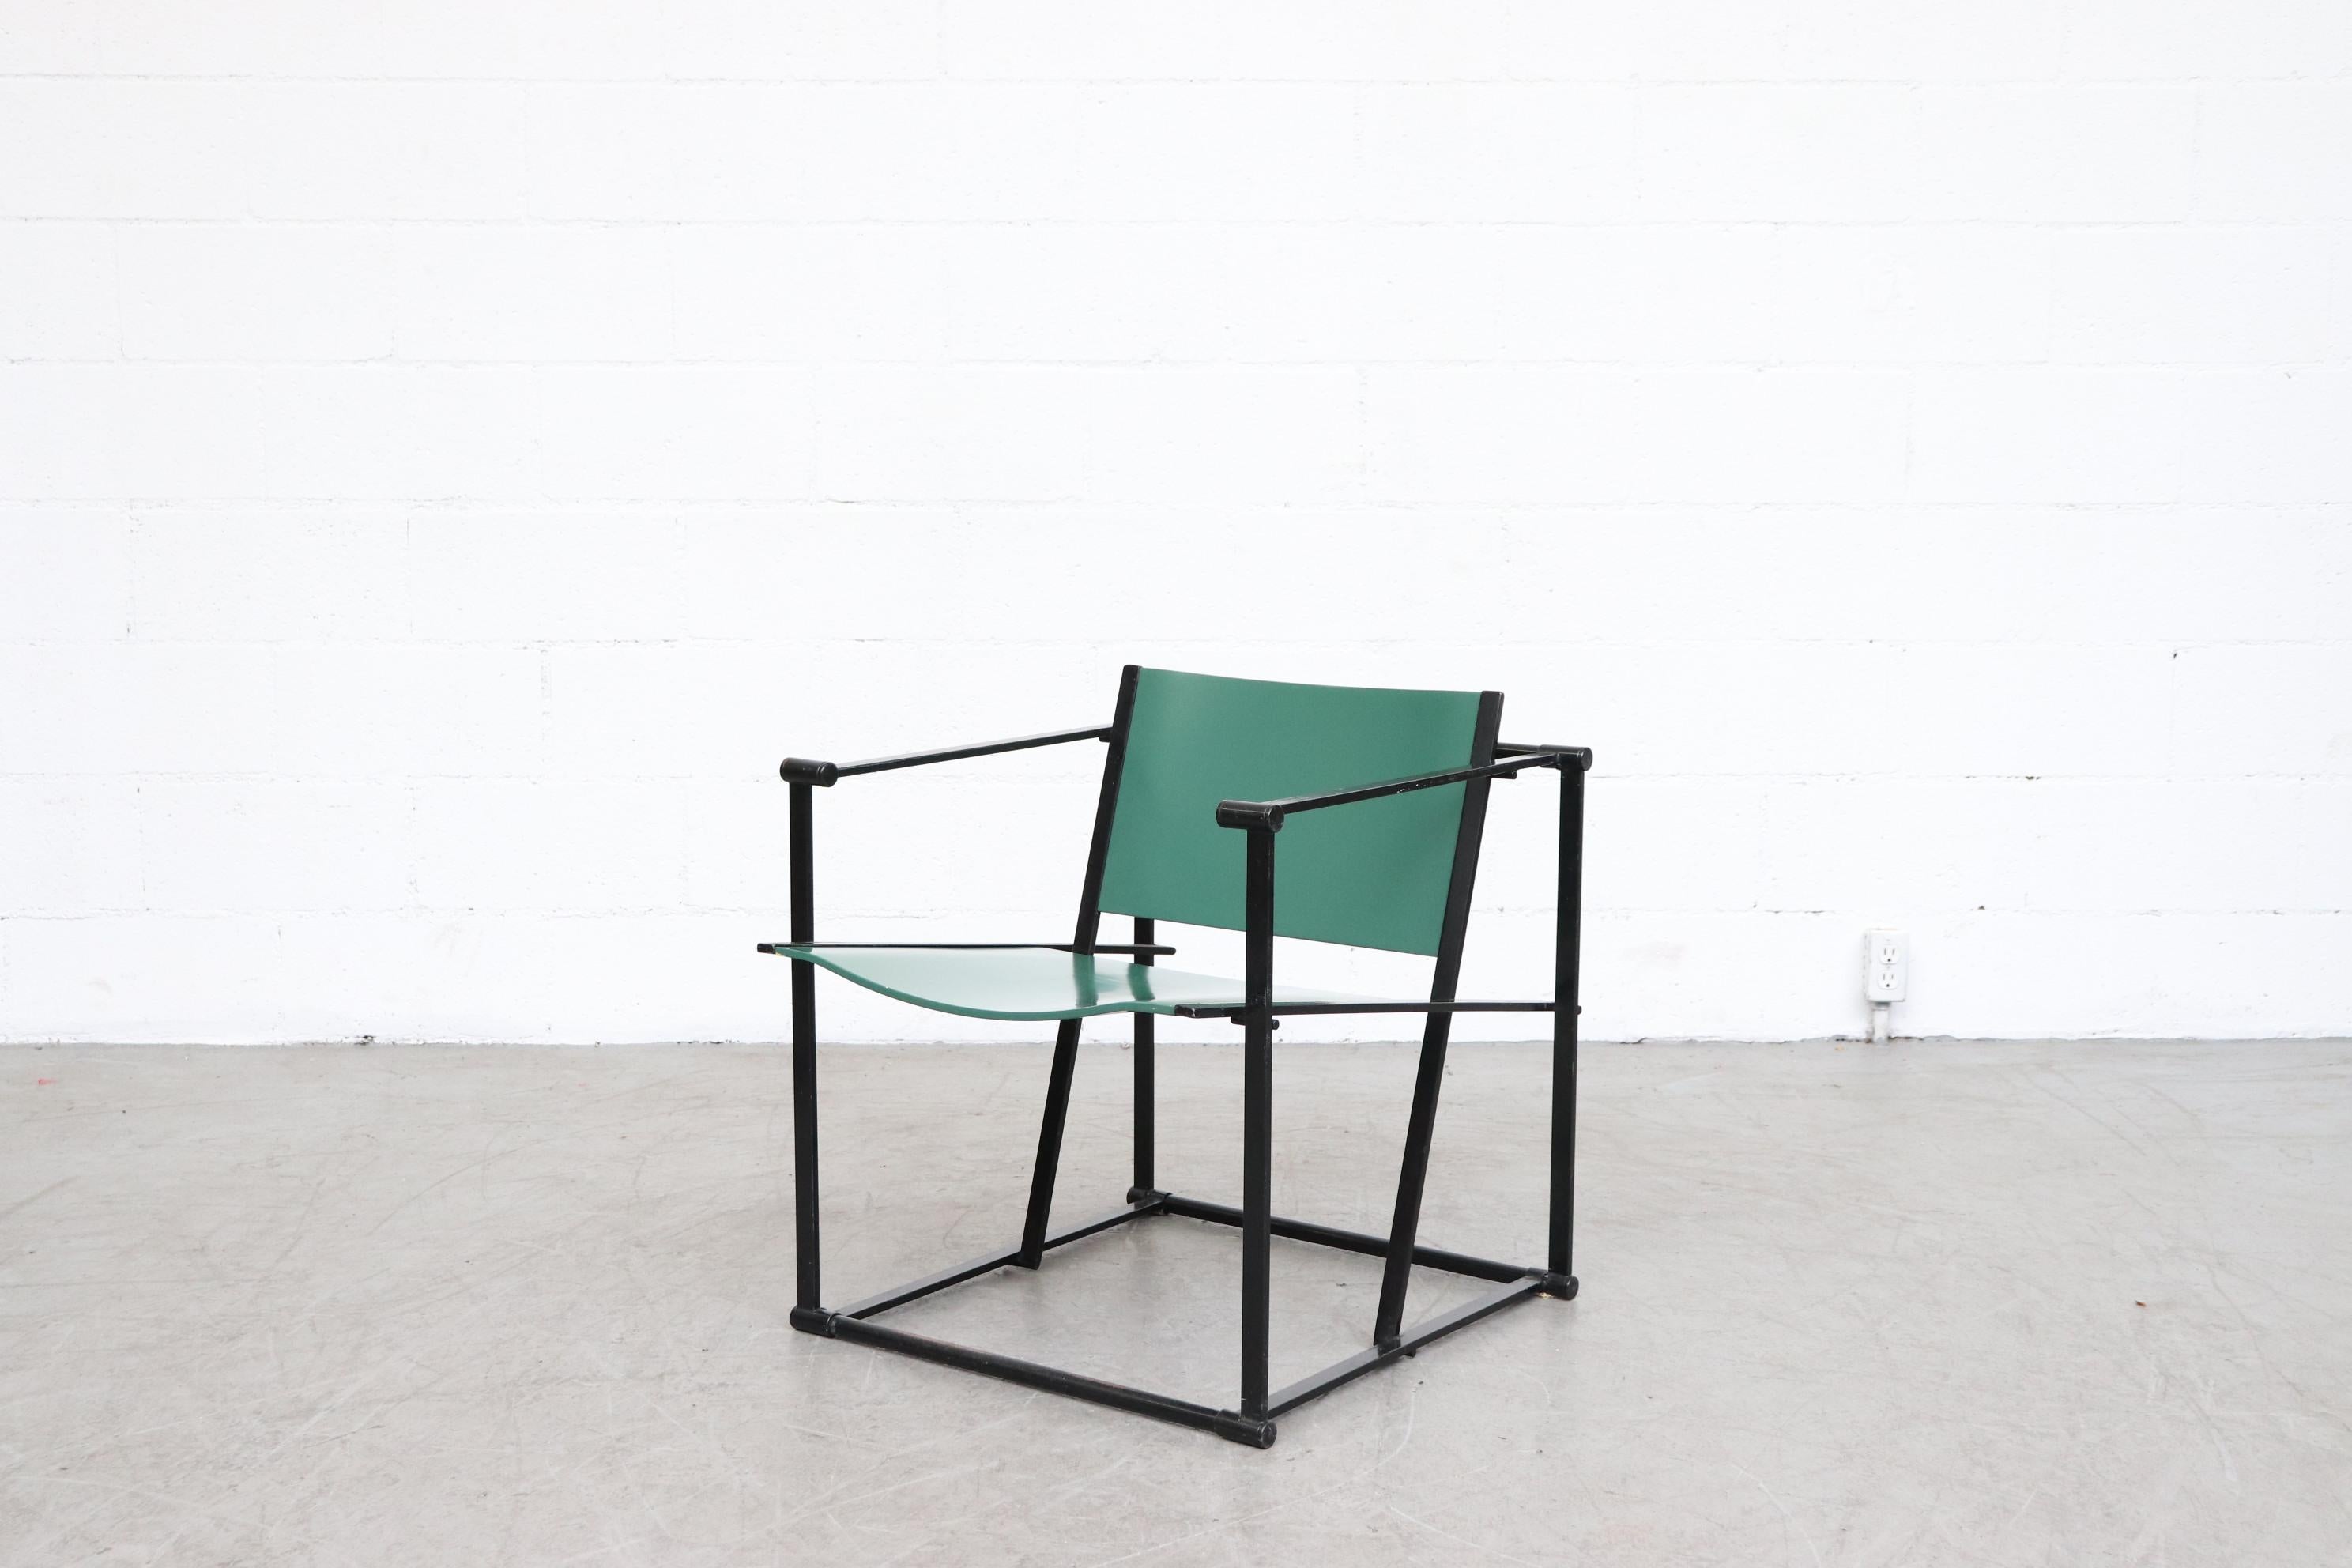 UMS Pastoe FM60, cubic chair lounge chair, designed in 1980 by Radboud van Beekum for Pastoe. Black enameled steel frame with green painted molded wood seating. Frame is in original condition with some wear to enamel. Some wear and minimal chipping